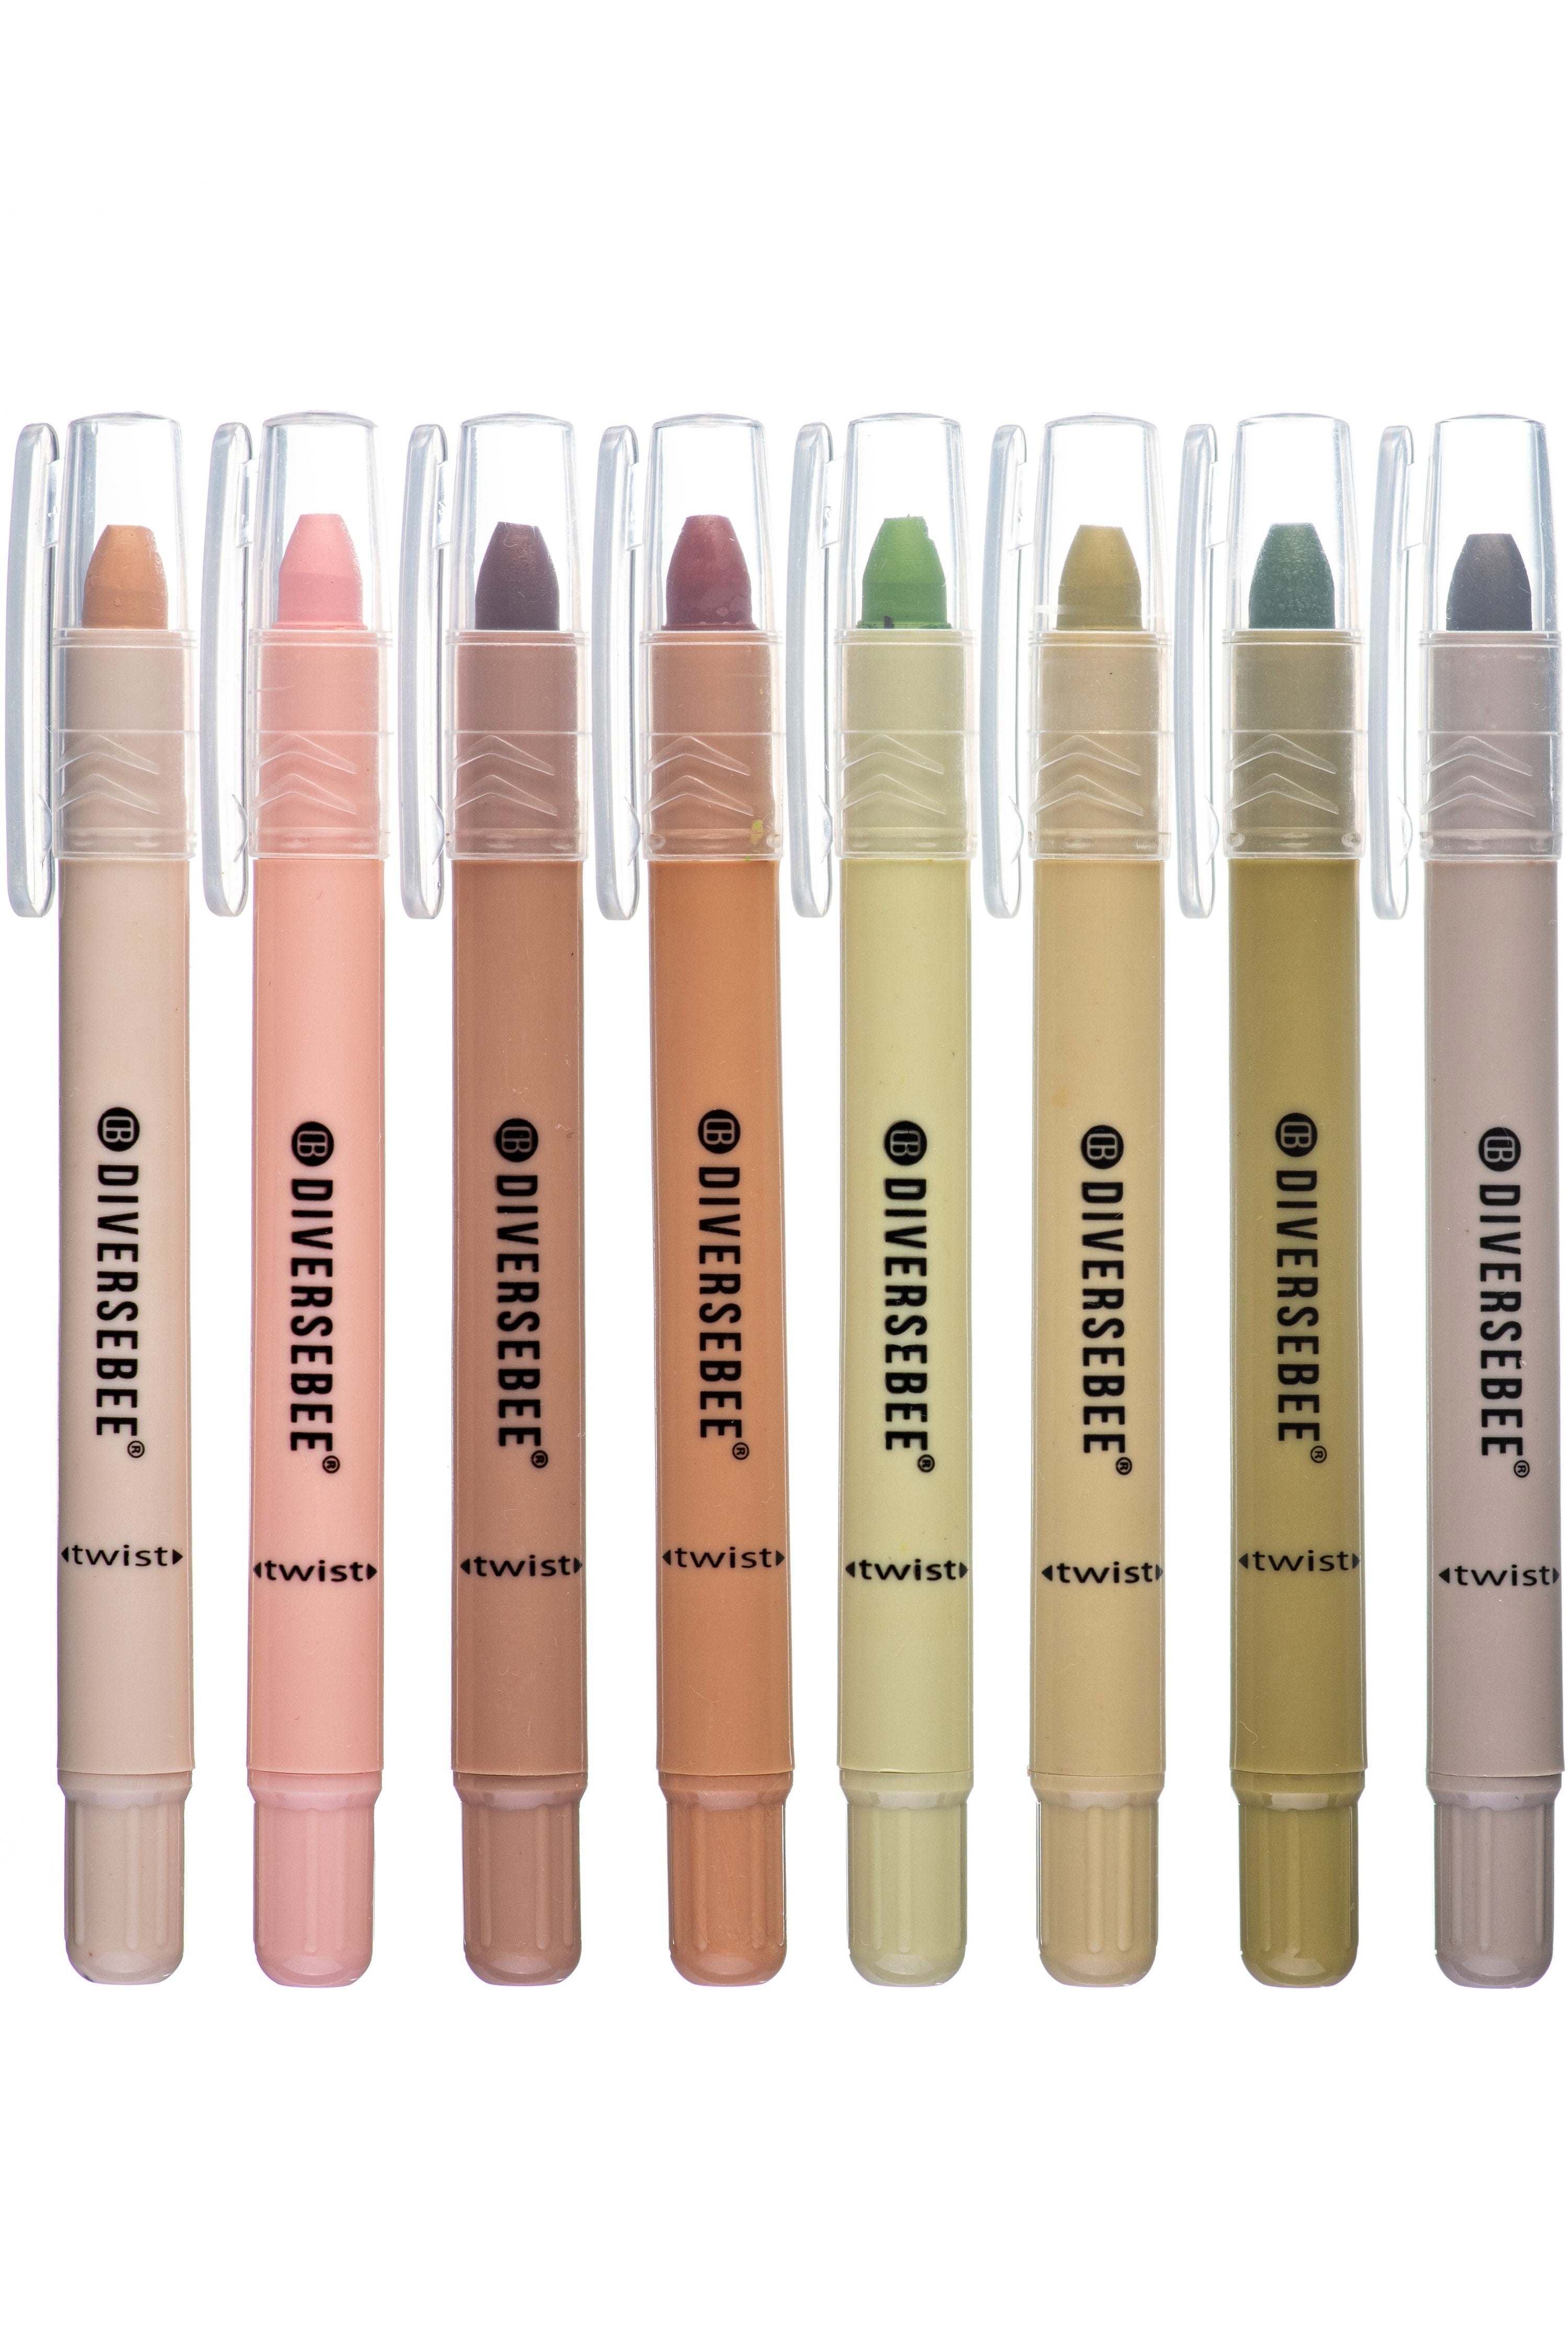 DIVERSEBEE Bible Highlighters with Soft Chisel Tip, 8 Pack